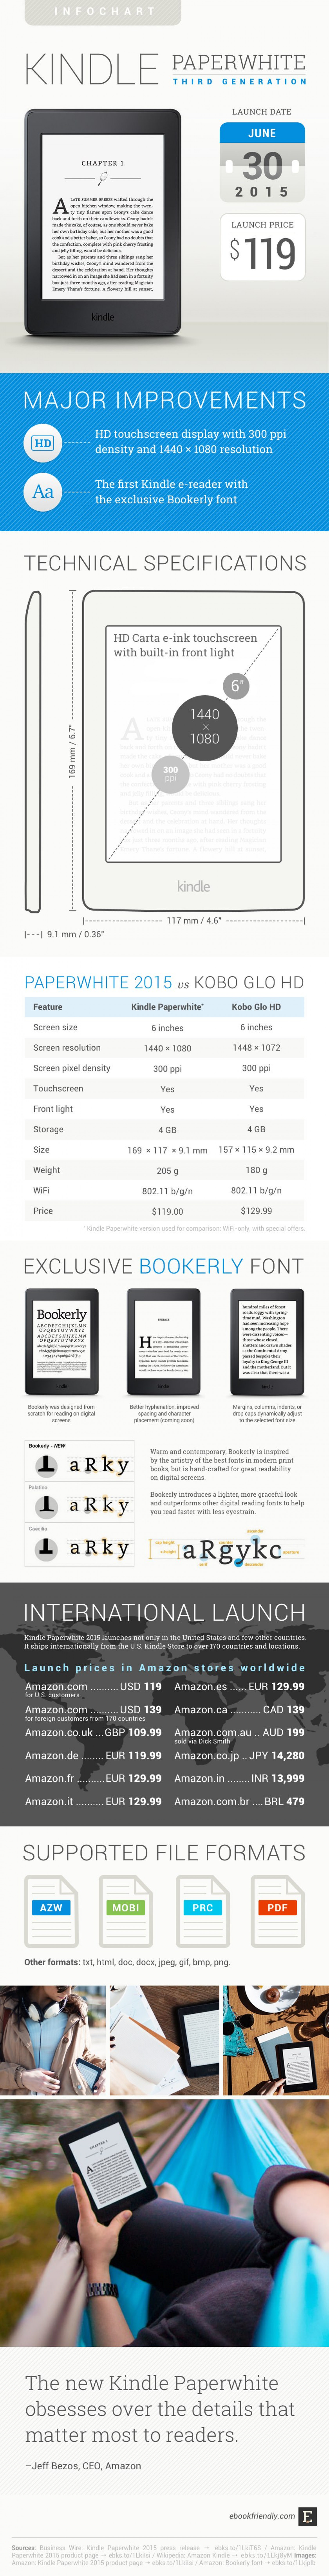 Kindle Paperwhite 2015 : everything you need to know Infographic